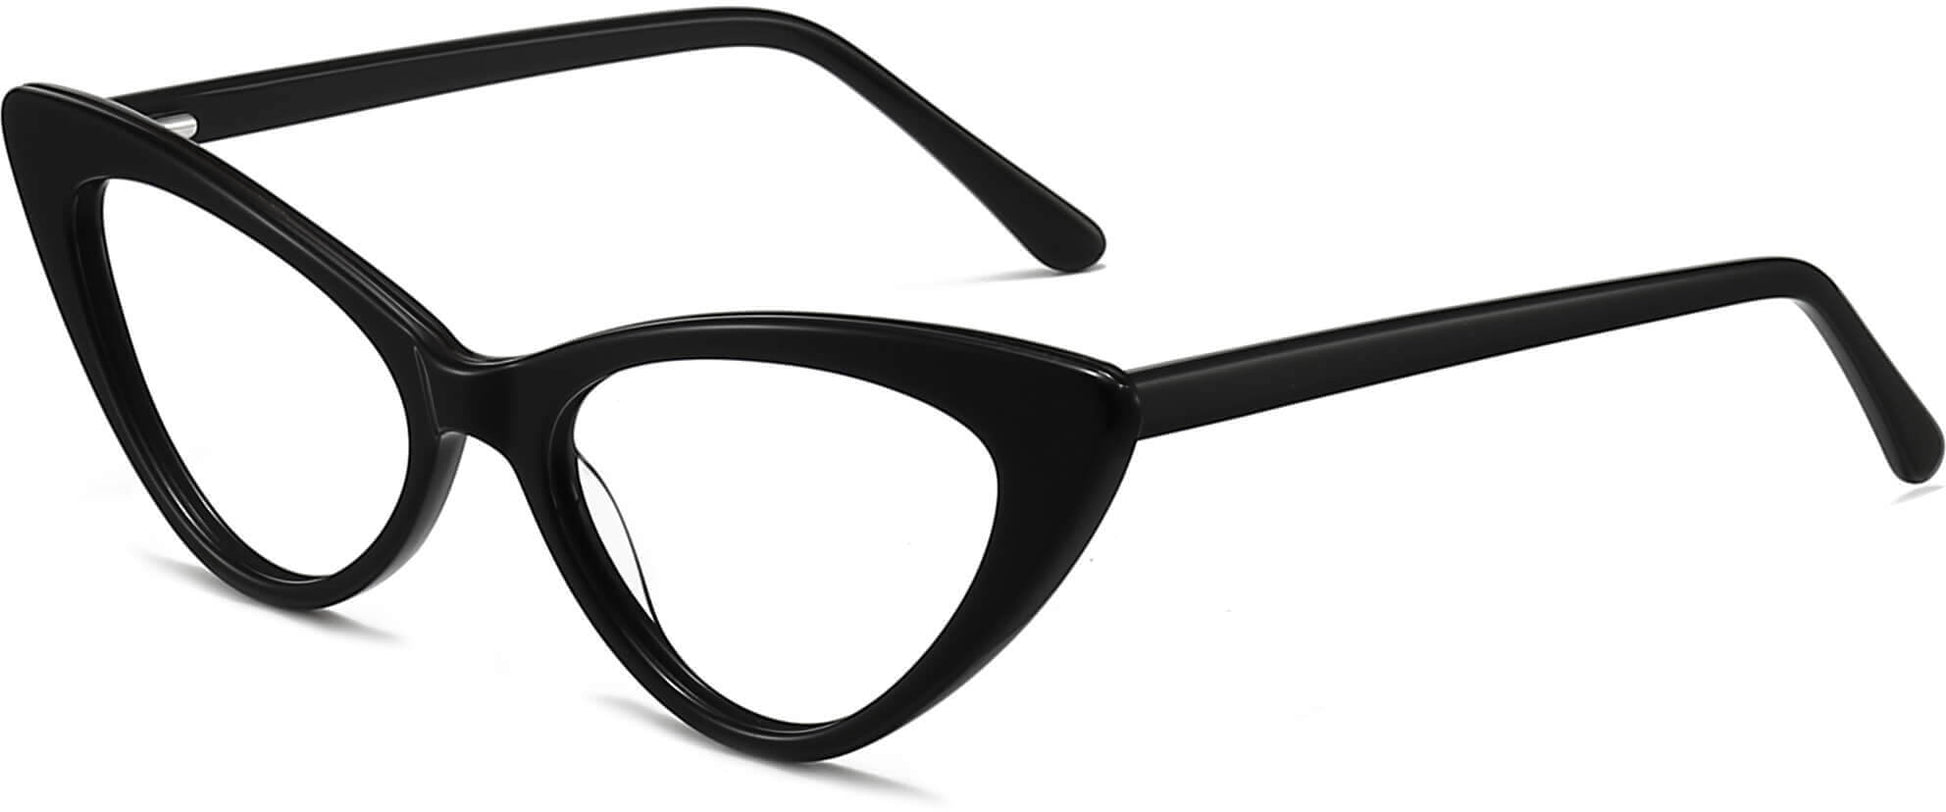 Brielle Cateye Black Eyeglasses from ANRRI, angle view